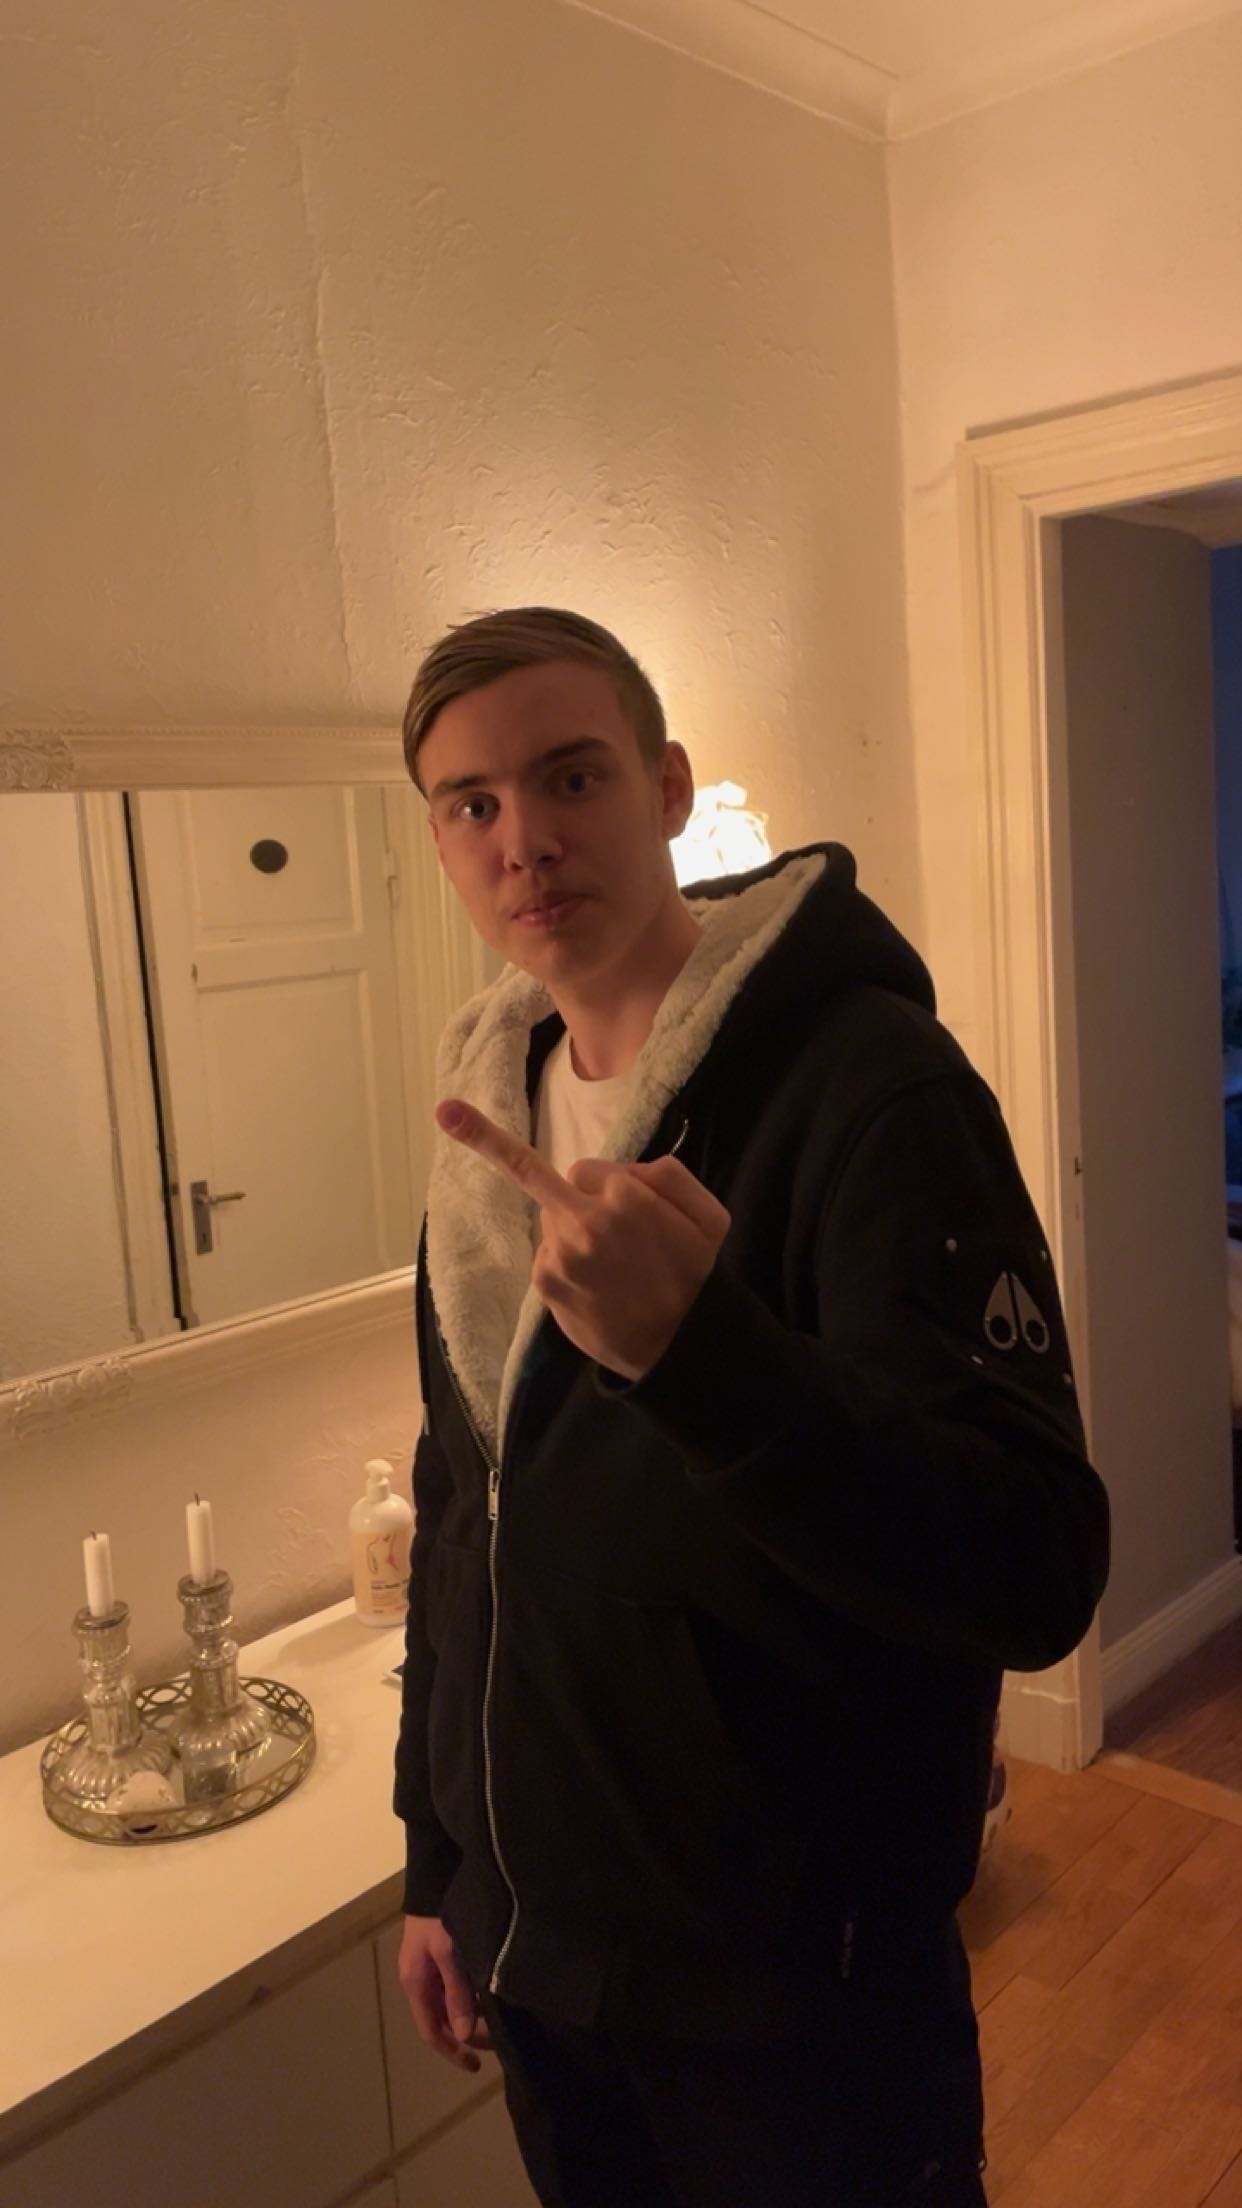 The Gang Member Who Ordered Attack On A Swedish Girl